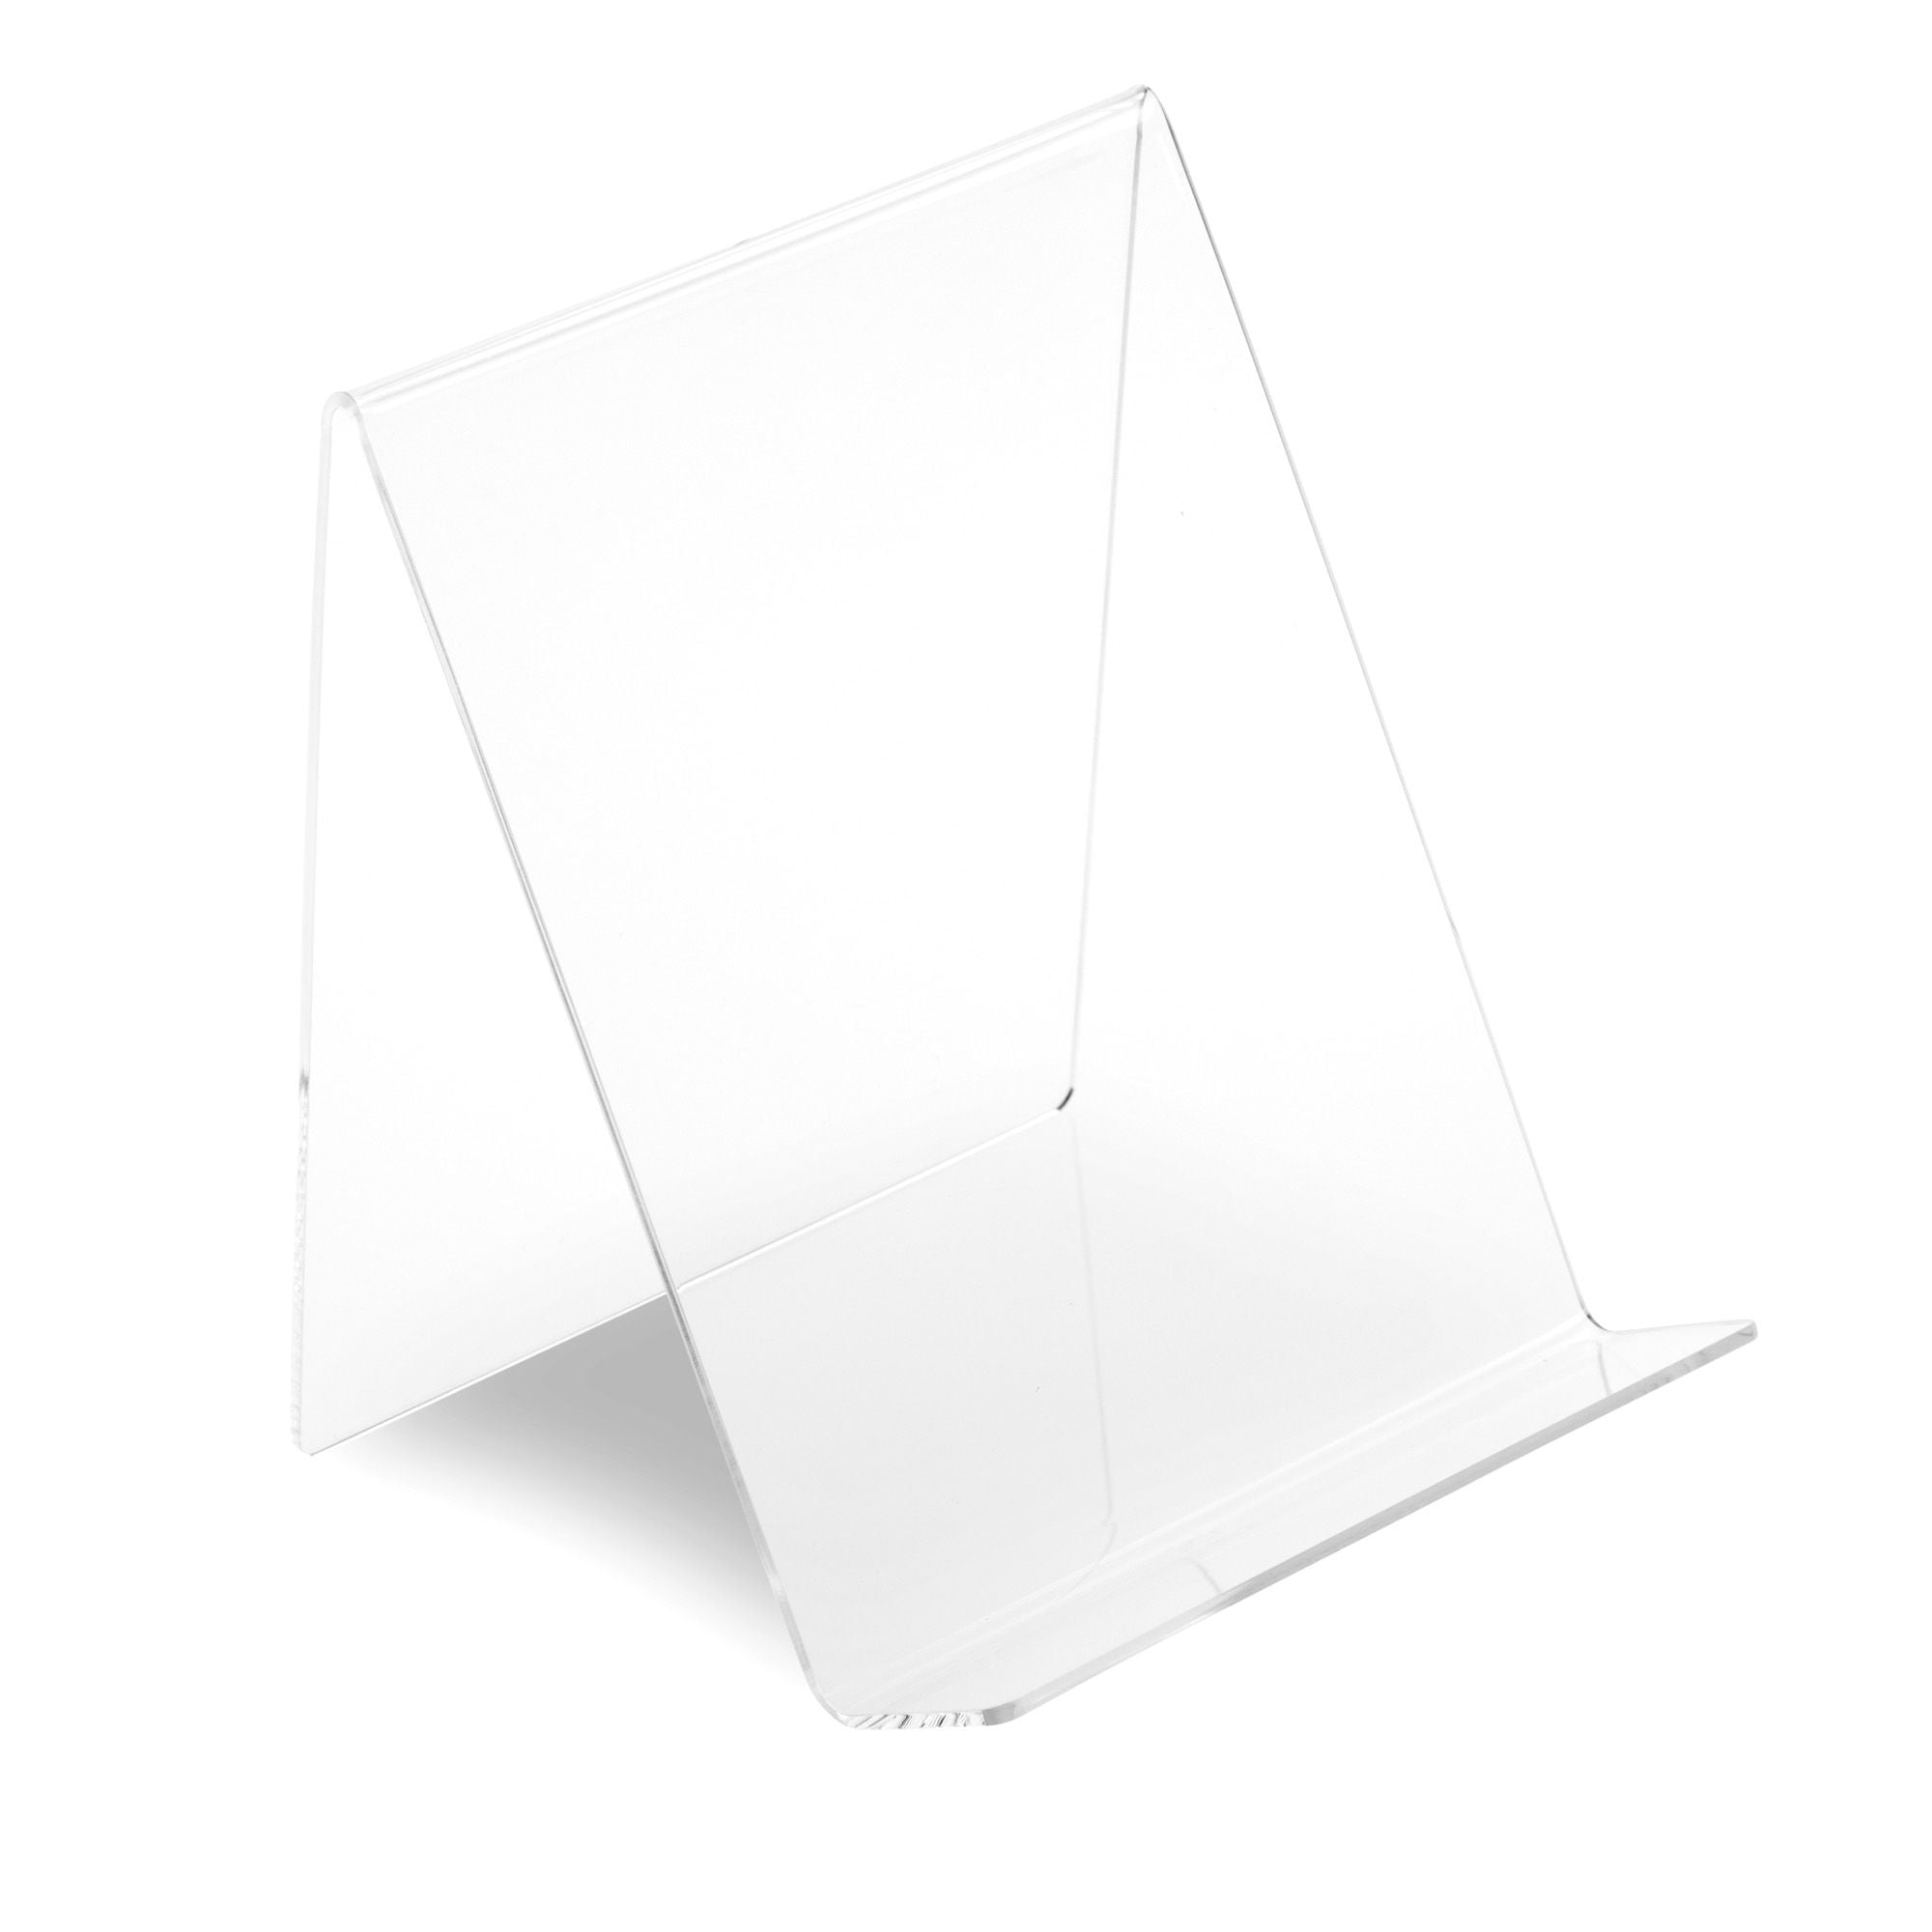 Kamehame Book Stands for Display Large 5 Pack 3.9x4.3x5.8 inch Acrylic Book Display Easel with Ledge, Clear Desktop Holder for Displaying Books